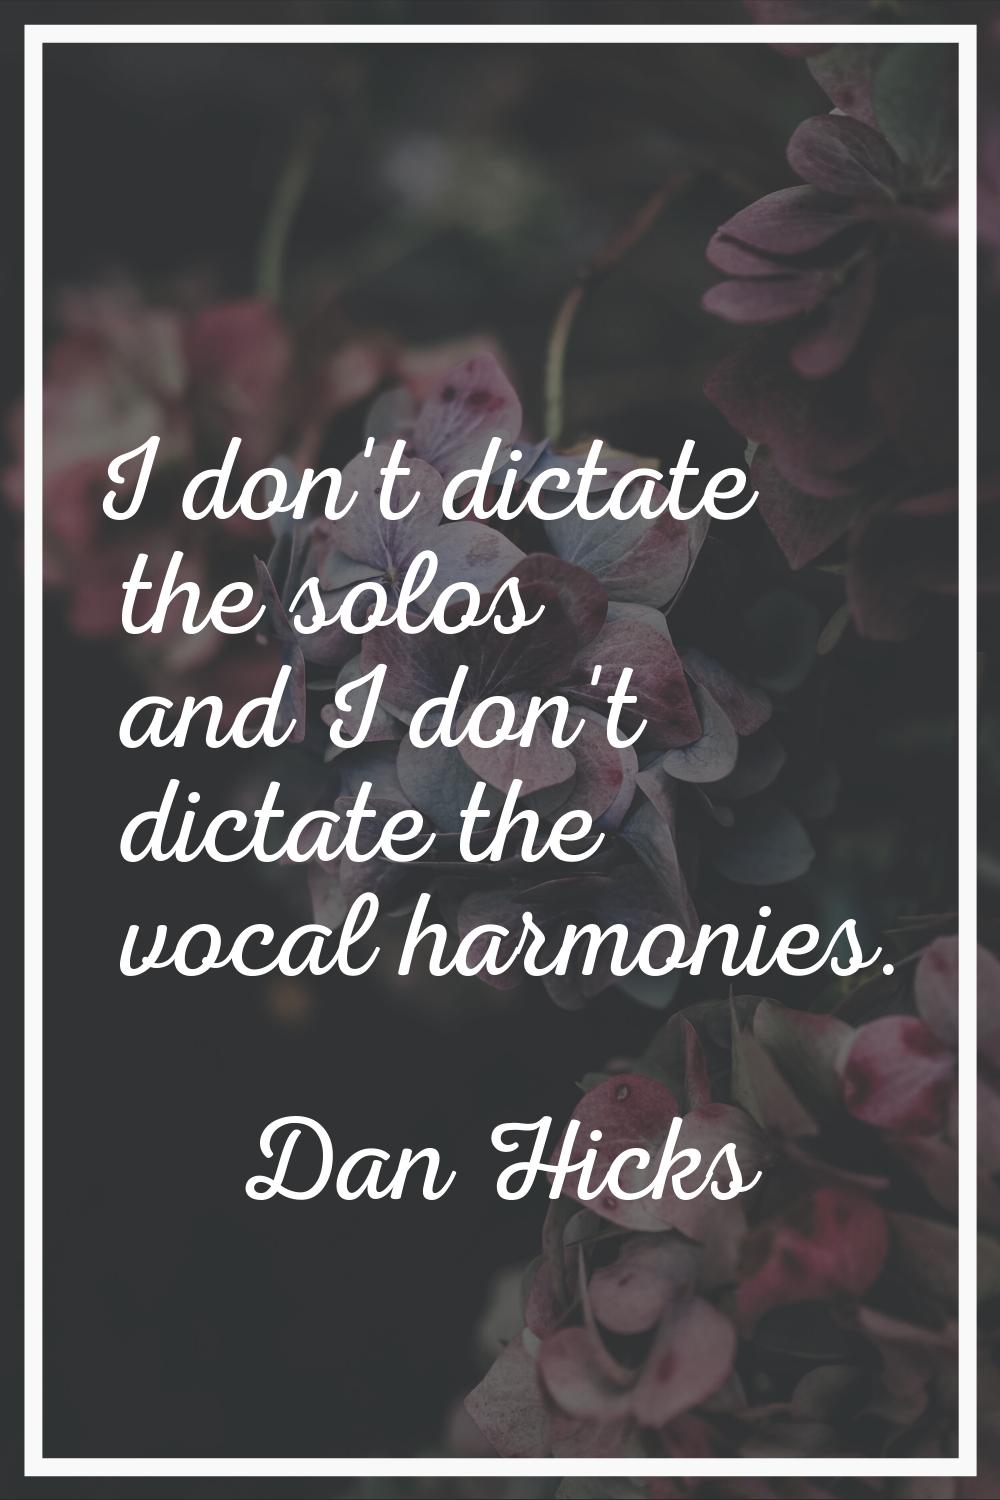 I don't dictate the solos and I don't dictate the vocal harmonies.